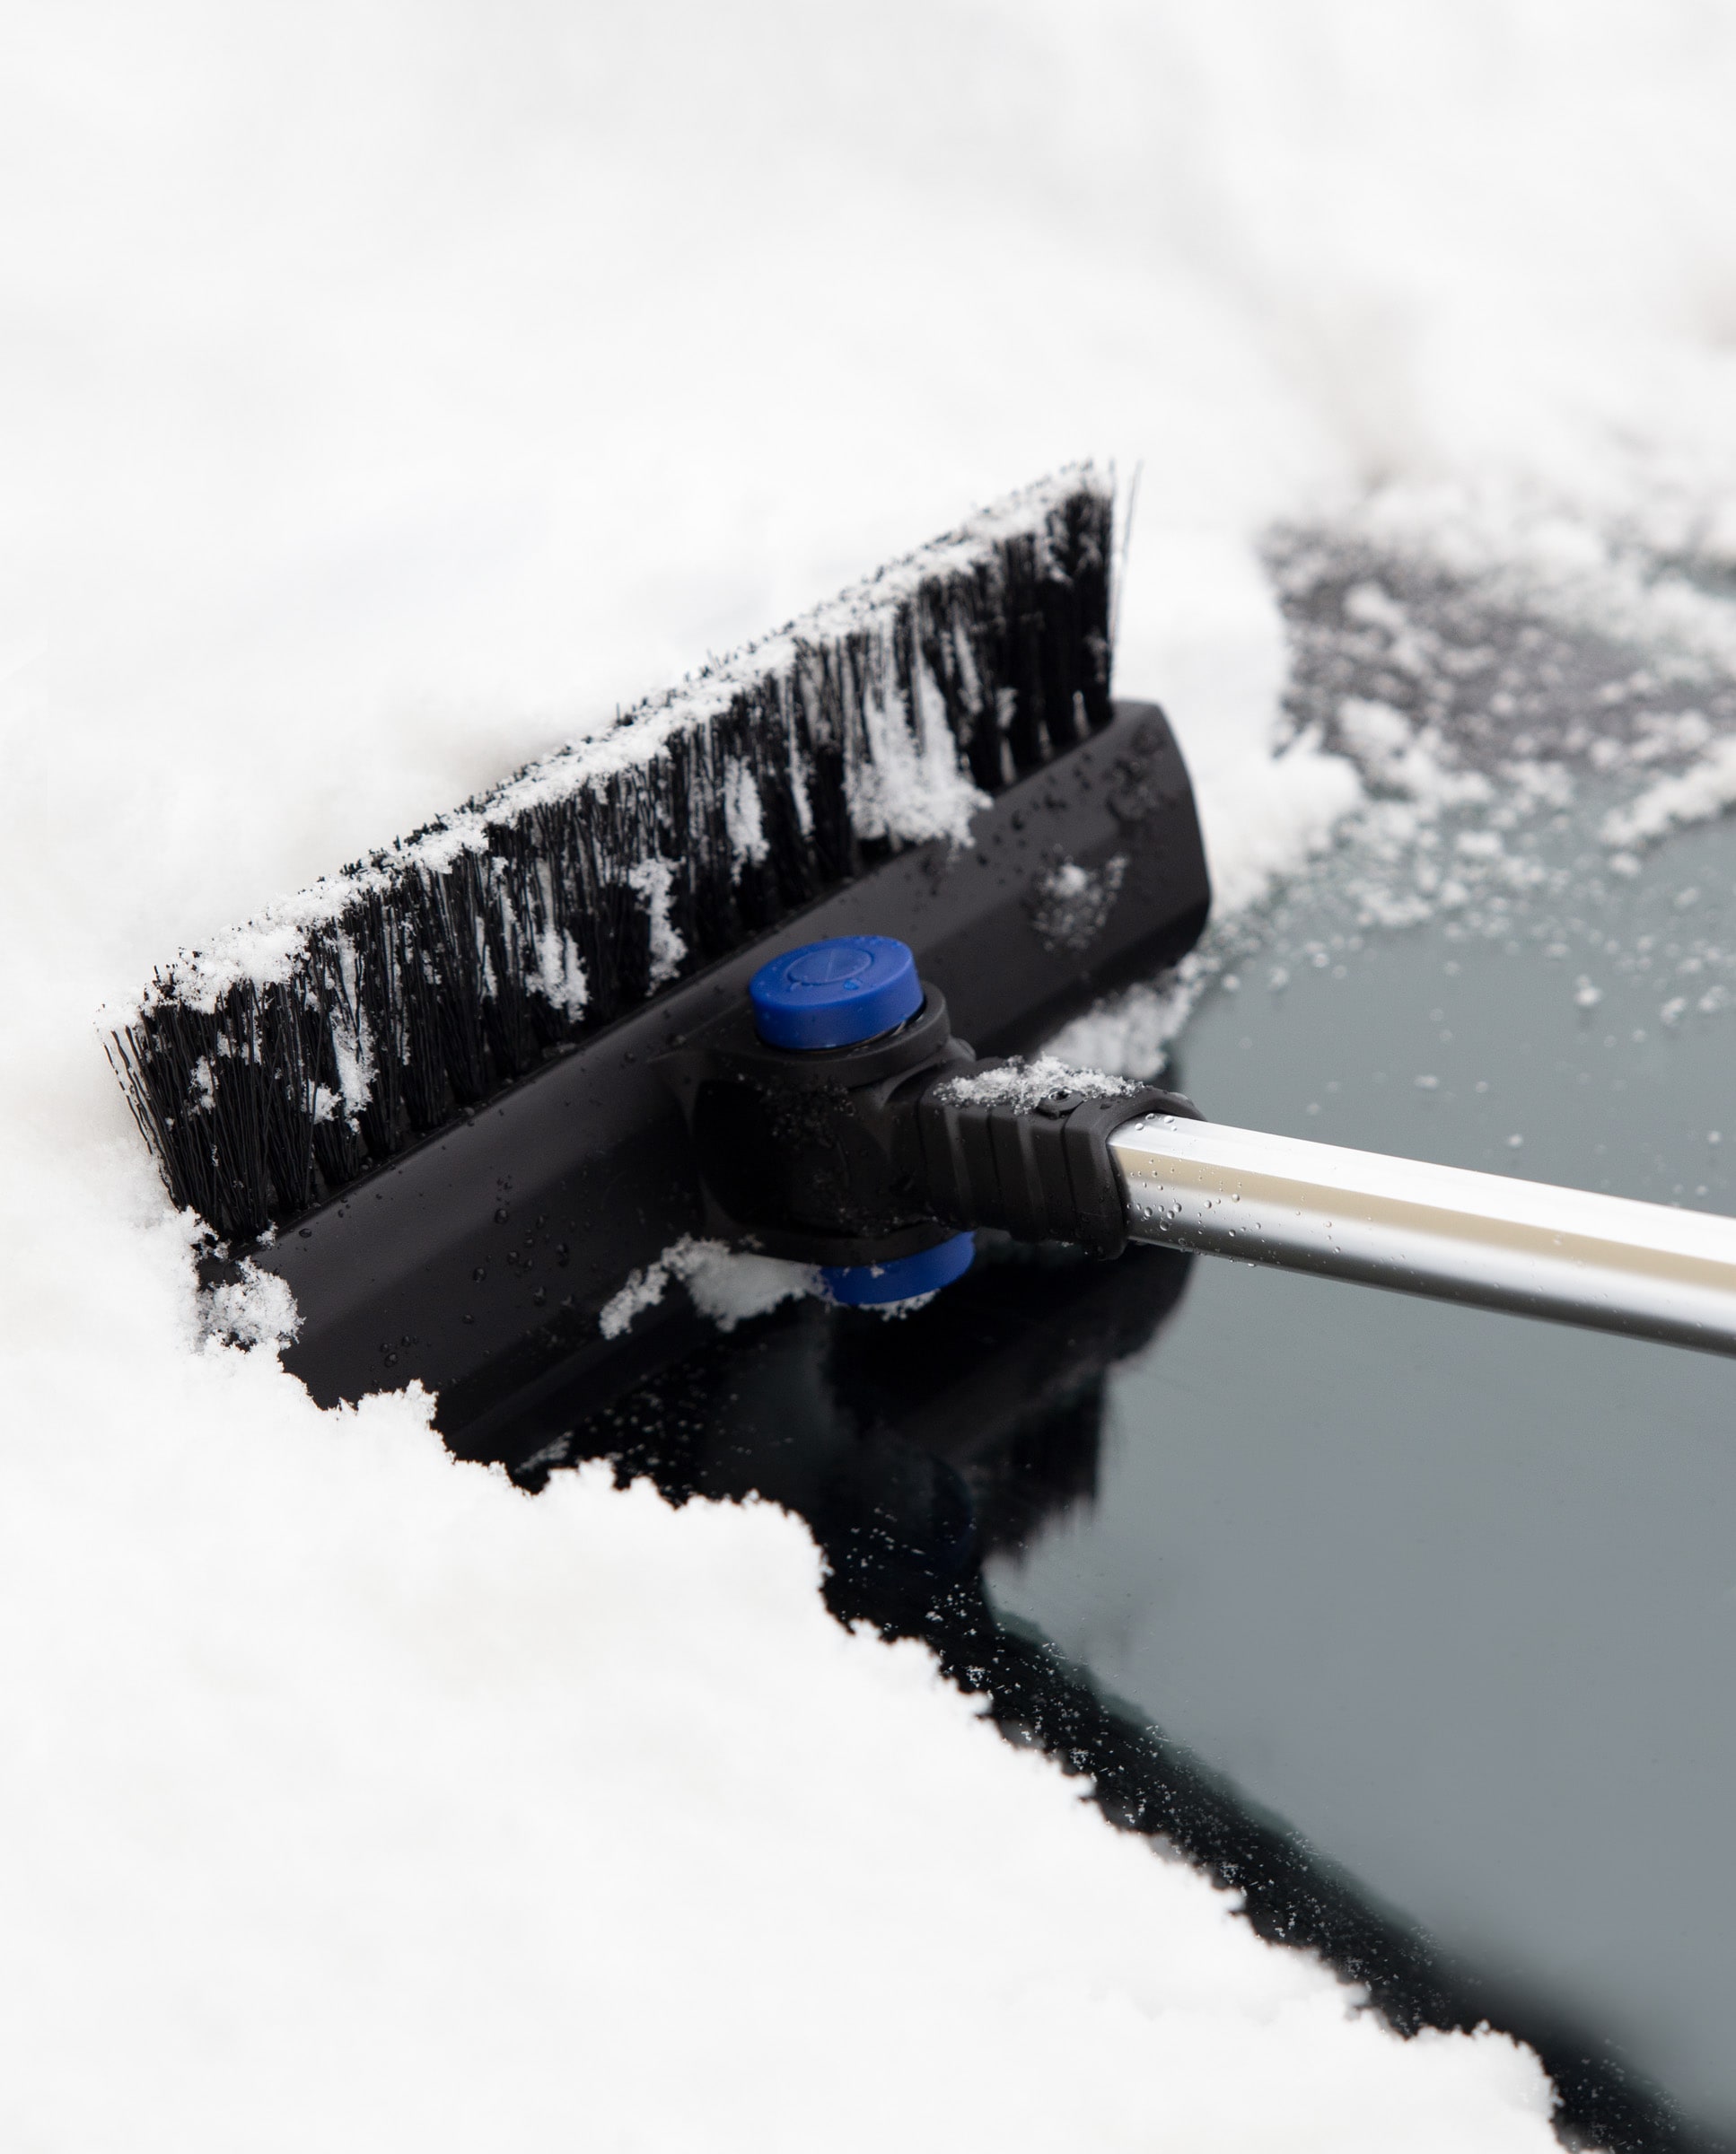 34 Extendable Ice Scrapers for Car Windshield 2-In-1 Snow Brush